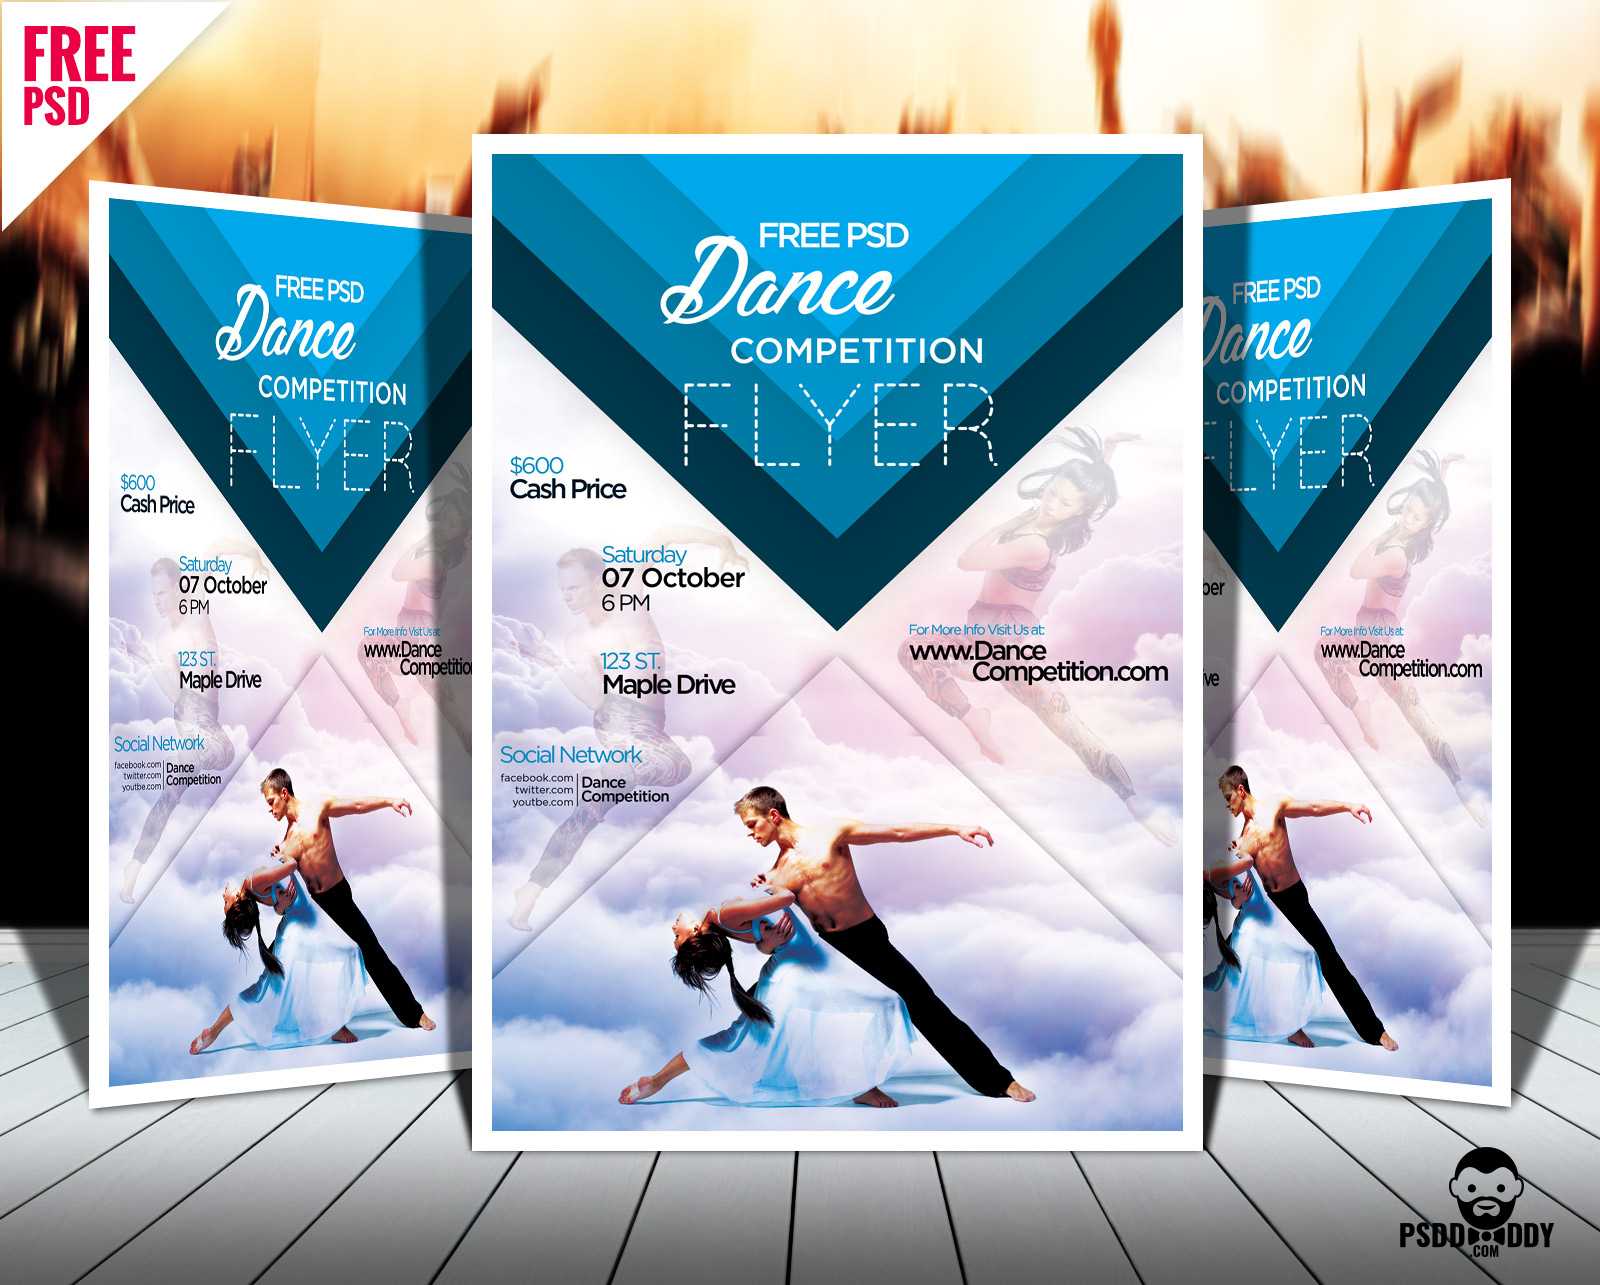 Download] Dance Competition Flyer Psd | Psddaddy Throughout Flyer Design Templates Psd Free Download